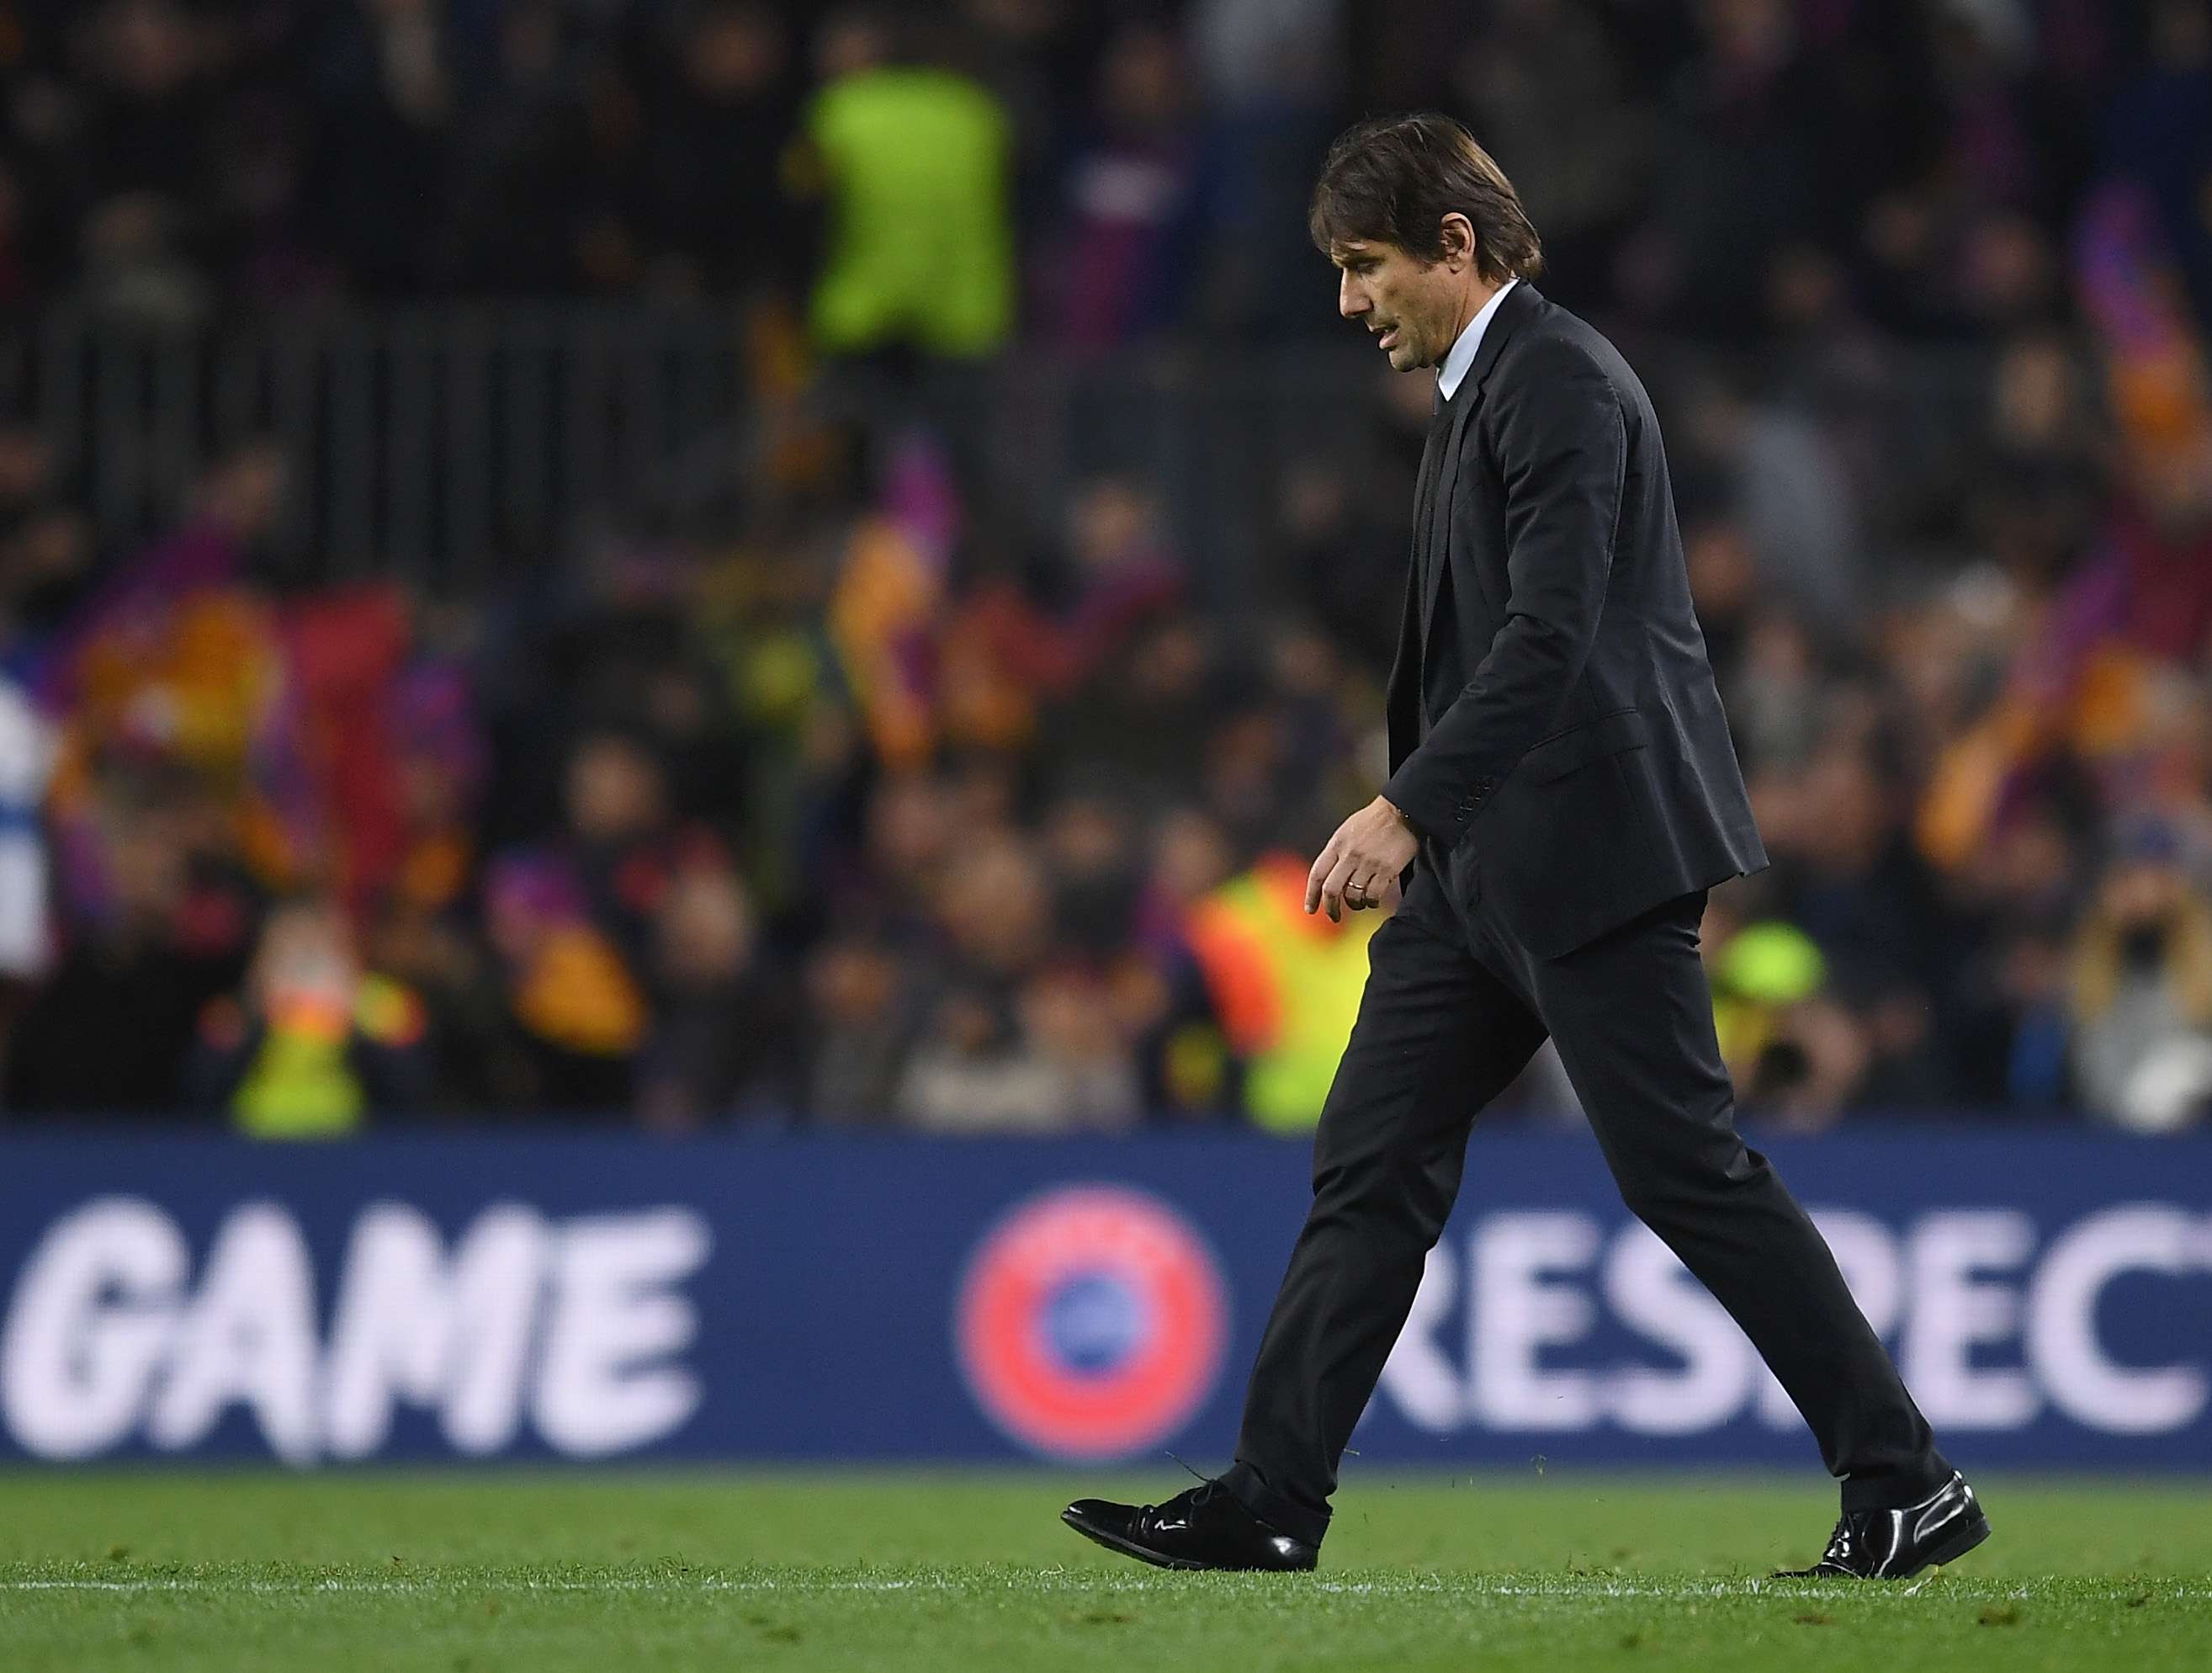 BARCELONA, SPAIN - MARCH 14:  Antonio Conte, Manager of Chelsea looks dejected after the UEFA Champions League Round of 16 Second Leg match FC Barcelona and Chelsea FC at Camp Nou on March 14, 2018 in Barcelona, Spain.  (Photo by David Ramos/Getty Images)